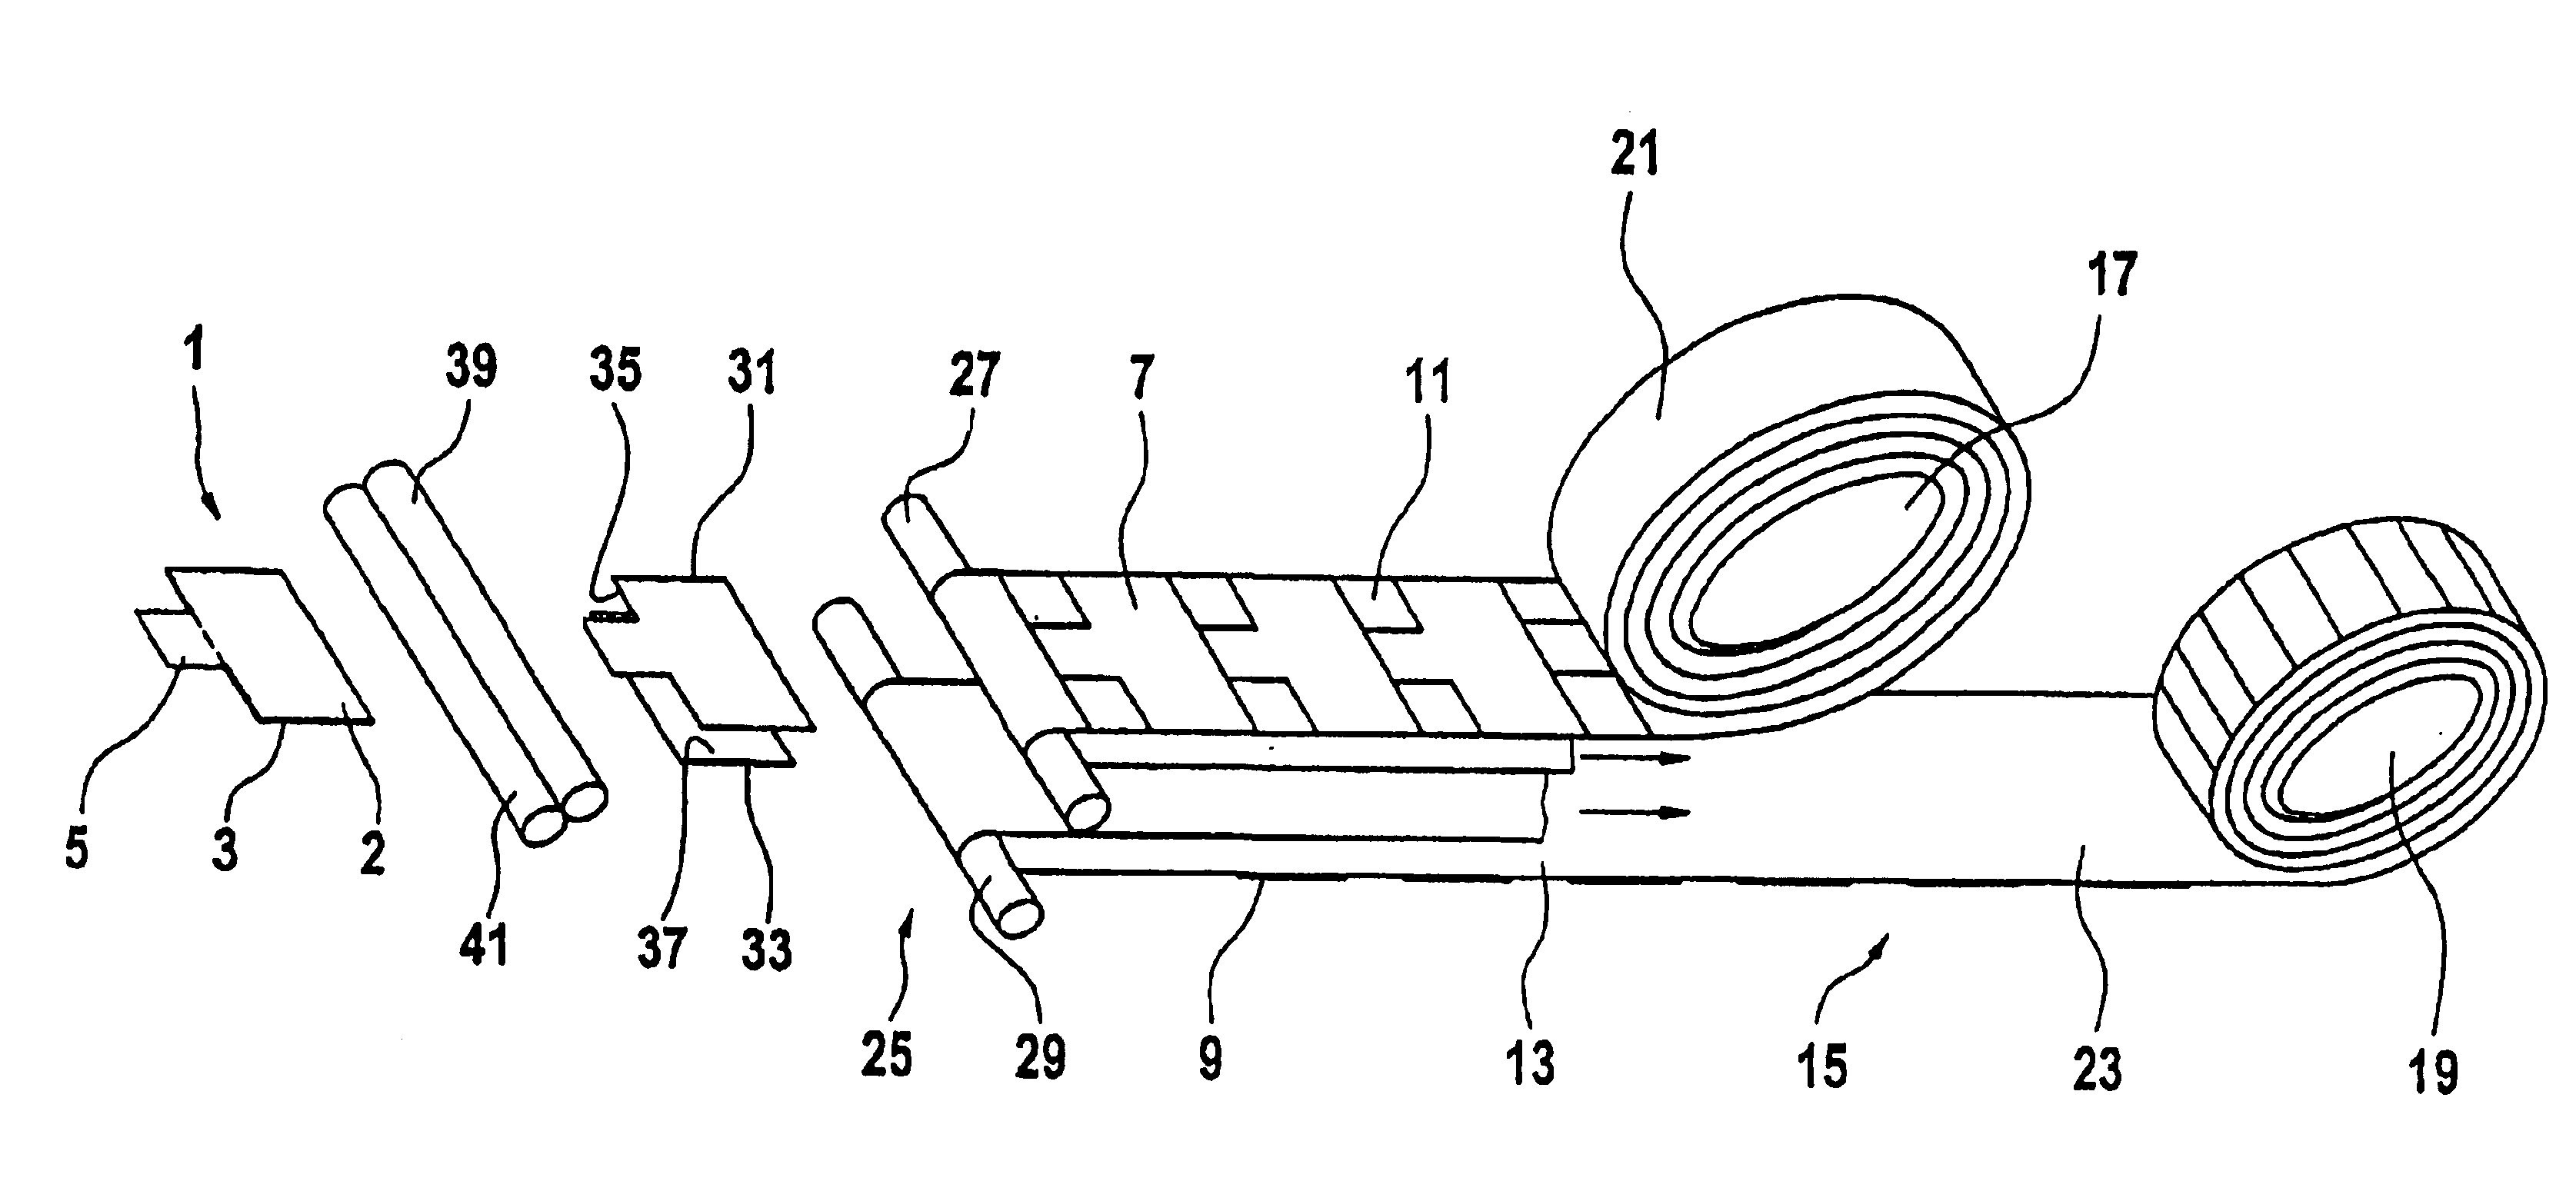 Method and device for producing double labels and corresponding double label